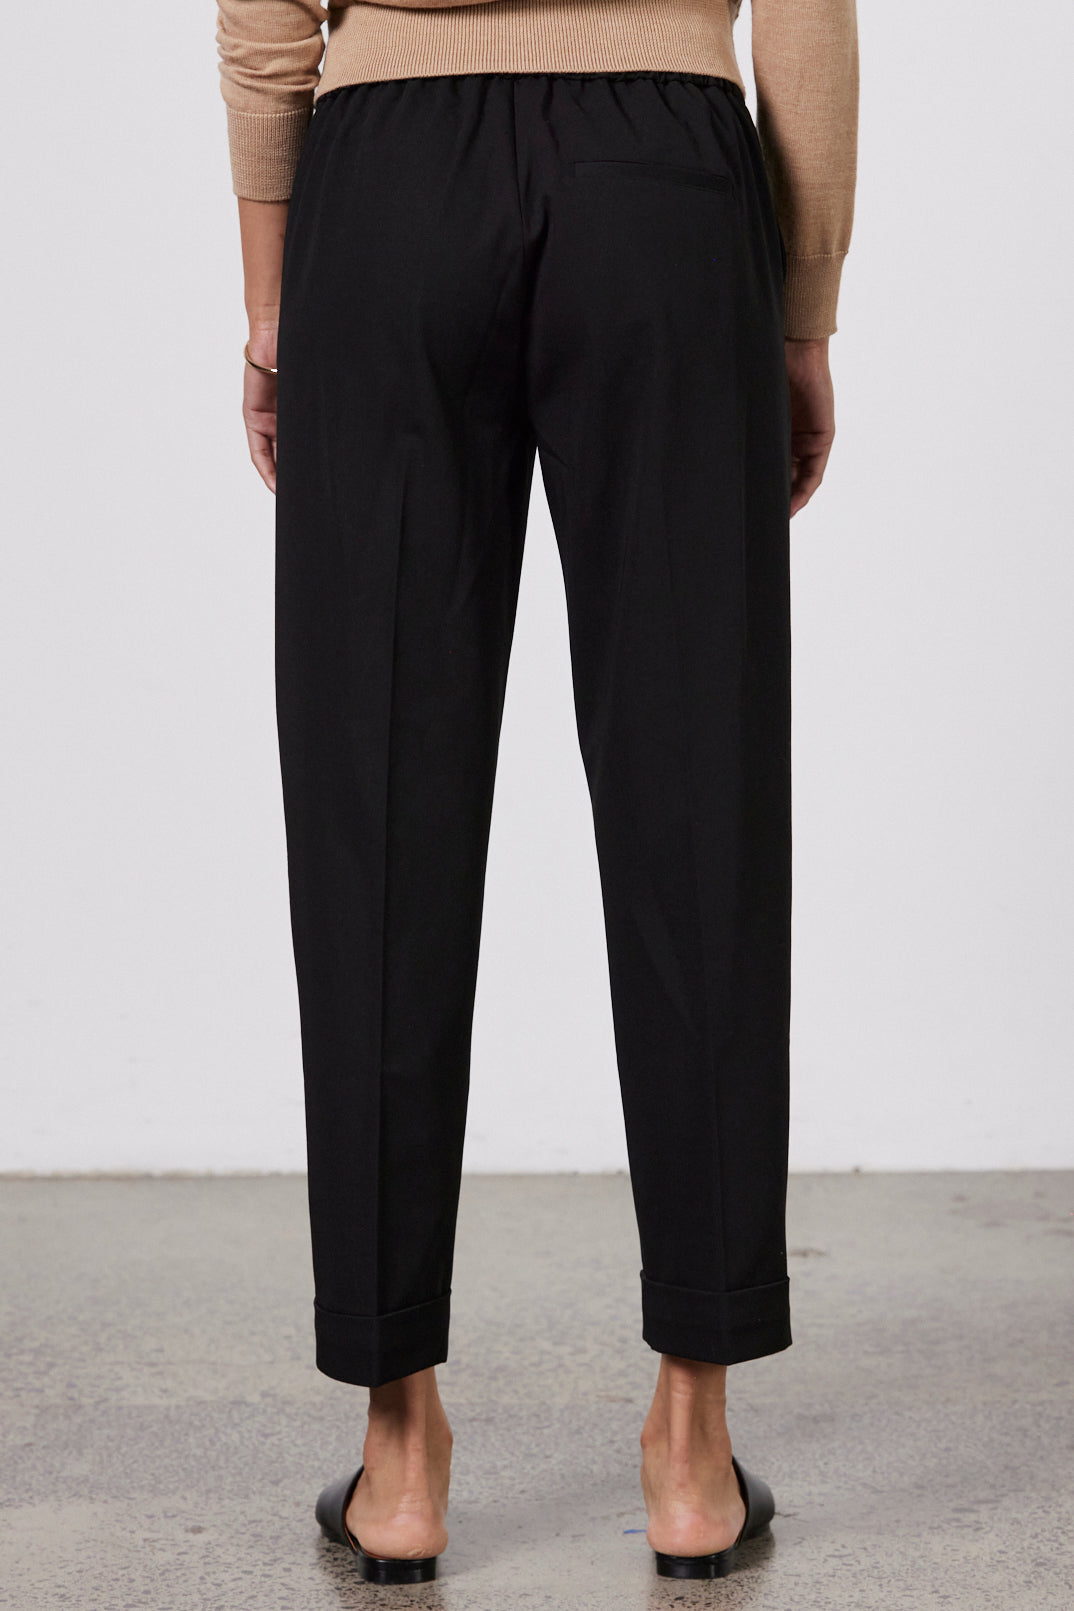 LAING HARDY CROPPED PANTS  The Laing Hardy Cropped Pants are a cropped version of the Laing Chaplain Pants.